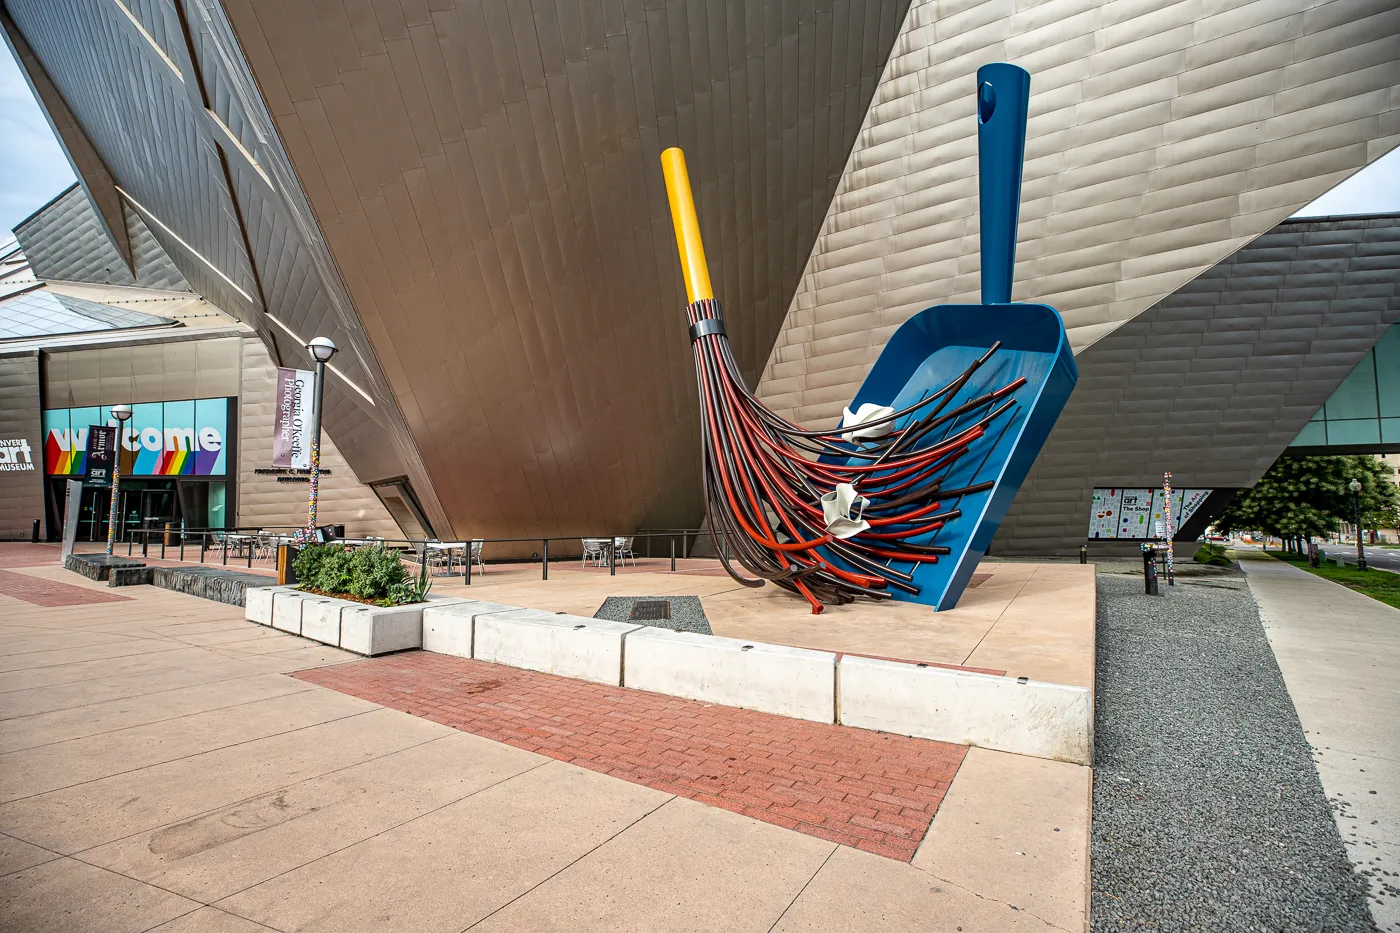 Big Sweep in Denver, Colorado - Giant dustpan and broom roadside attraction at the Denver Art Museum